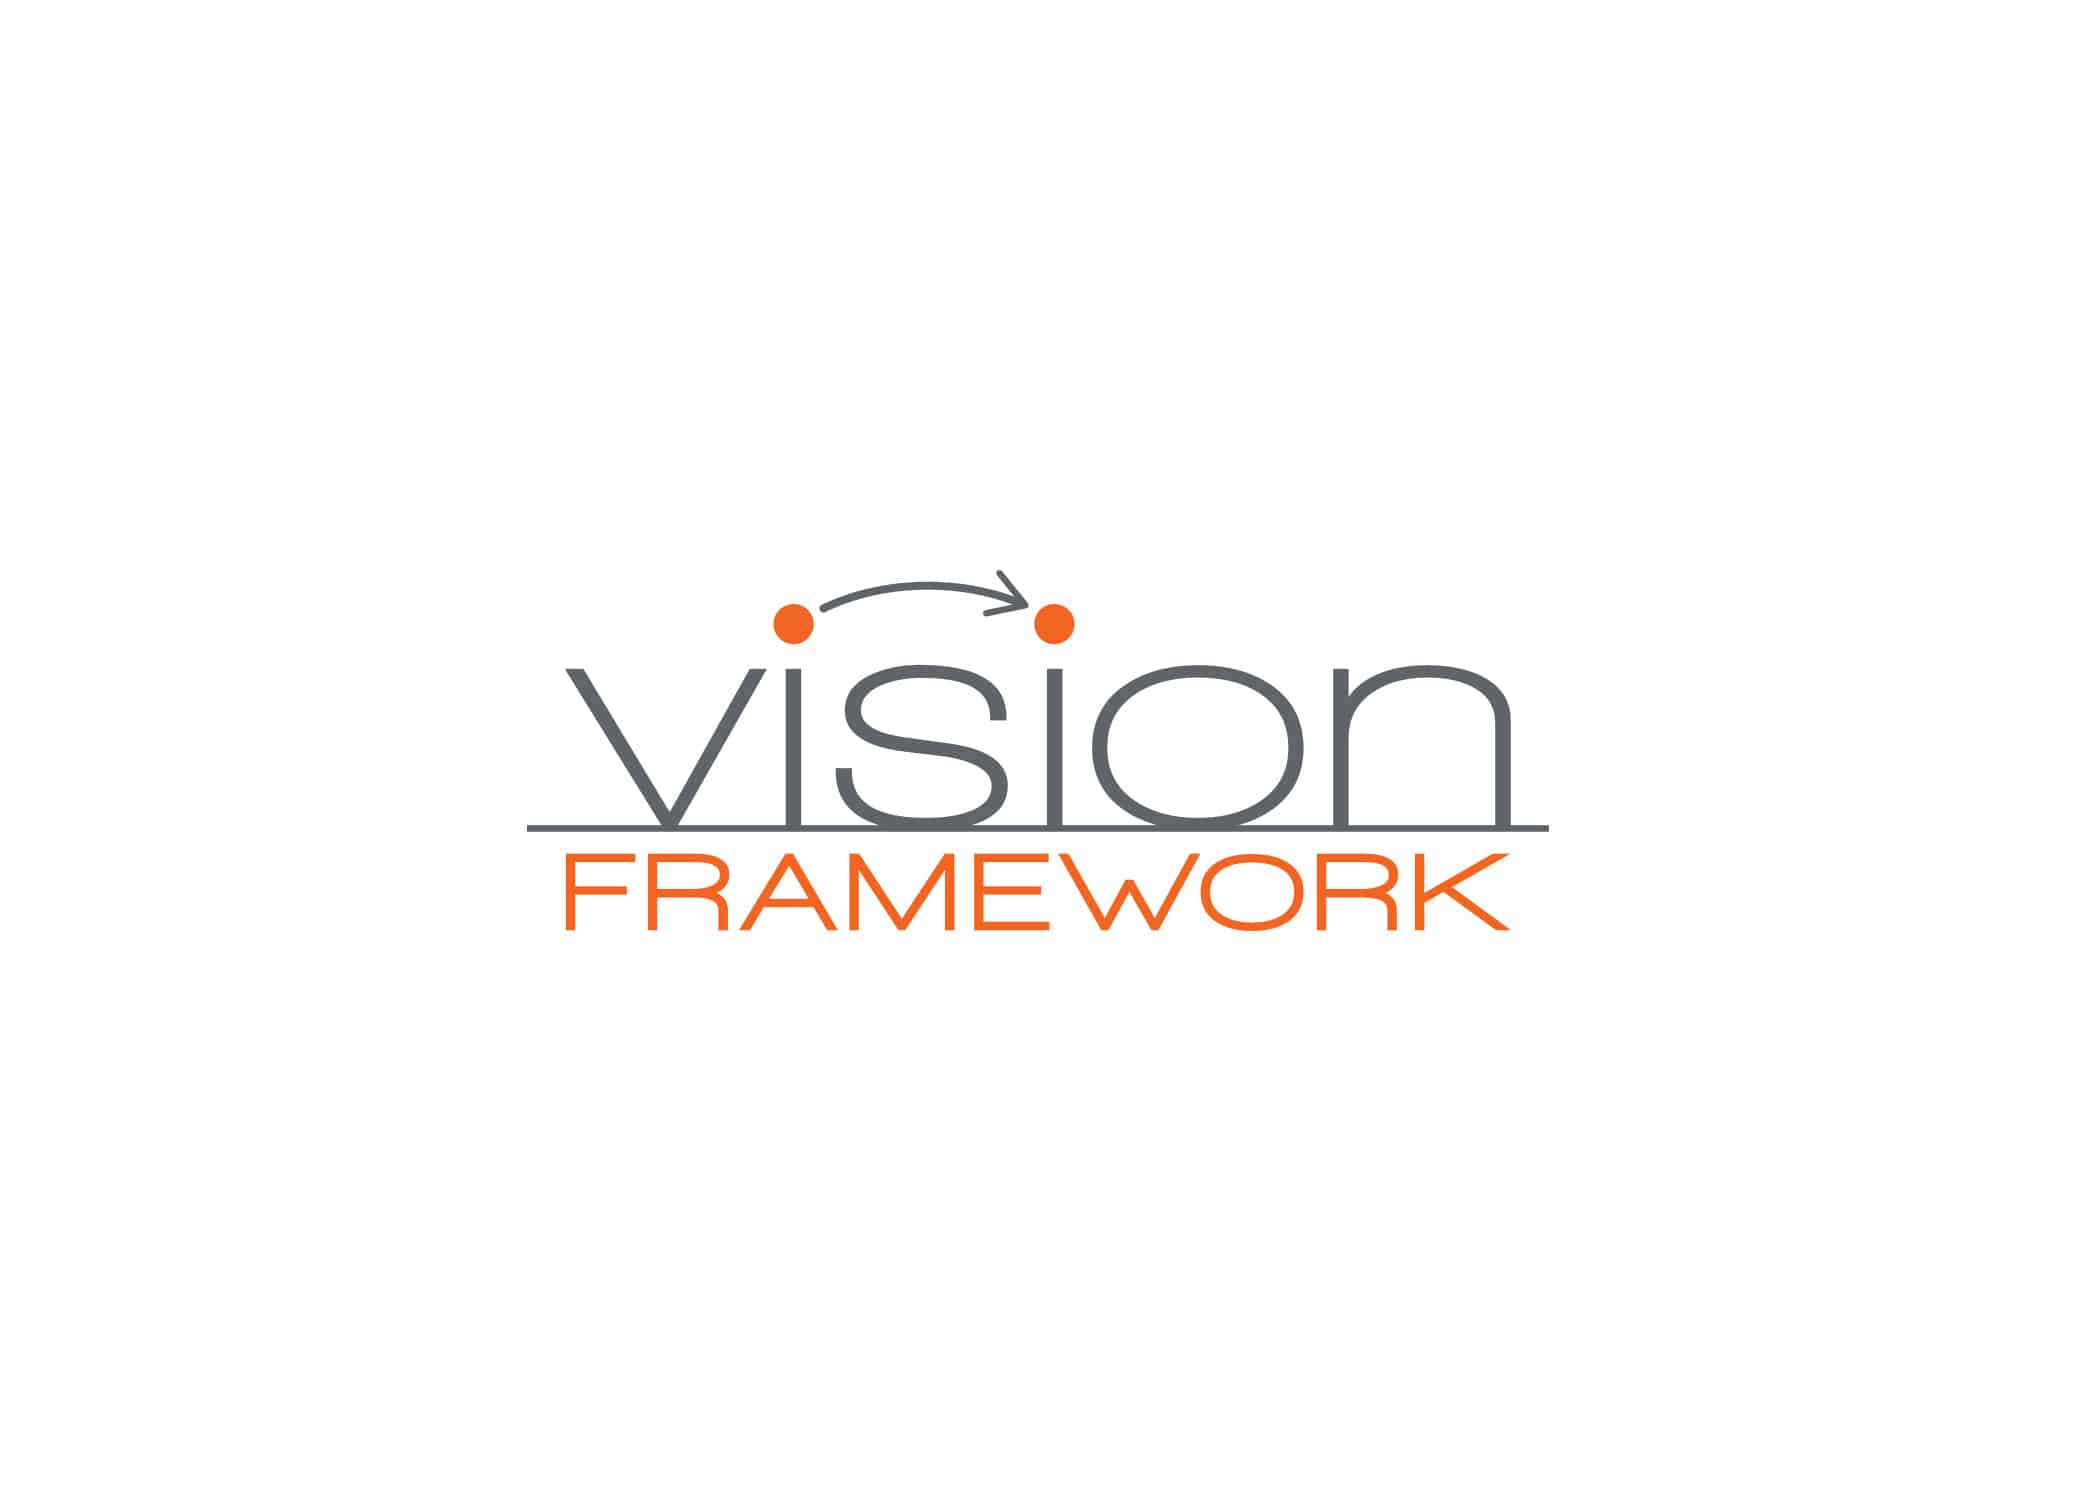 Vision Framework grey and orange logo design with arrow connecting the dots above each “I” in Vision.